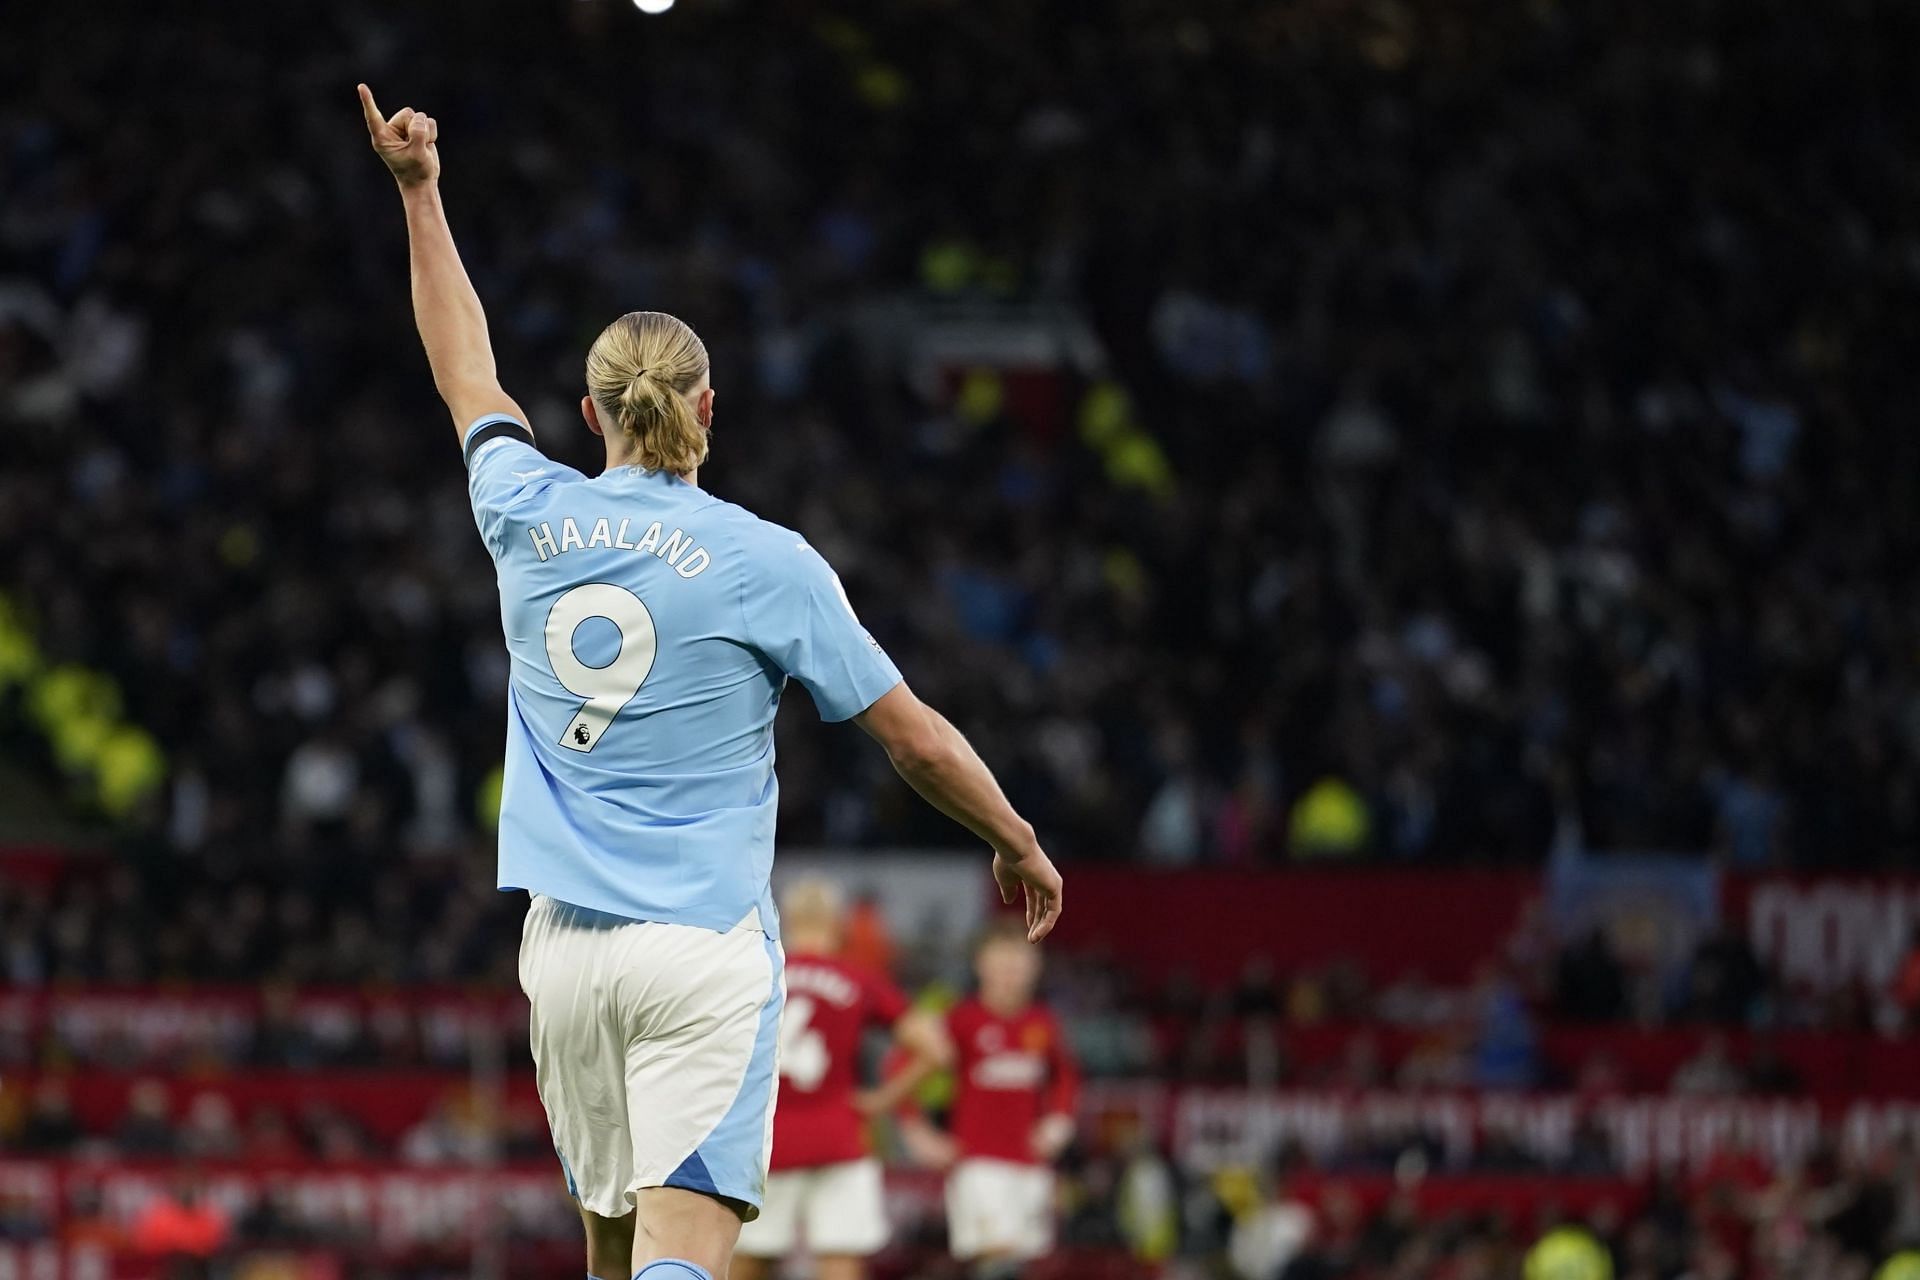 Erling Haaland has been in incredible form since signing for Manchester City